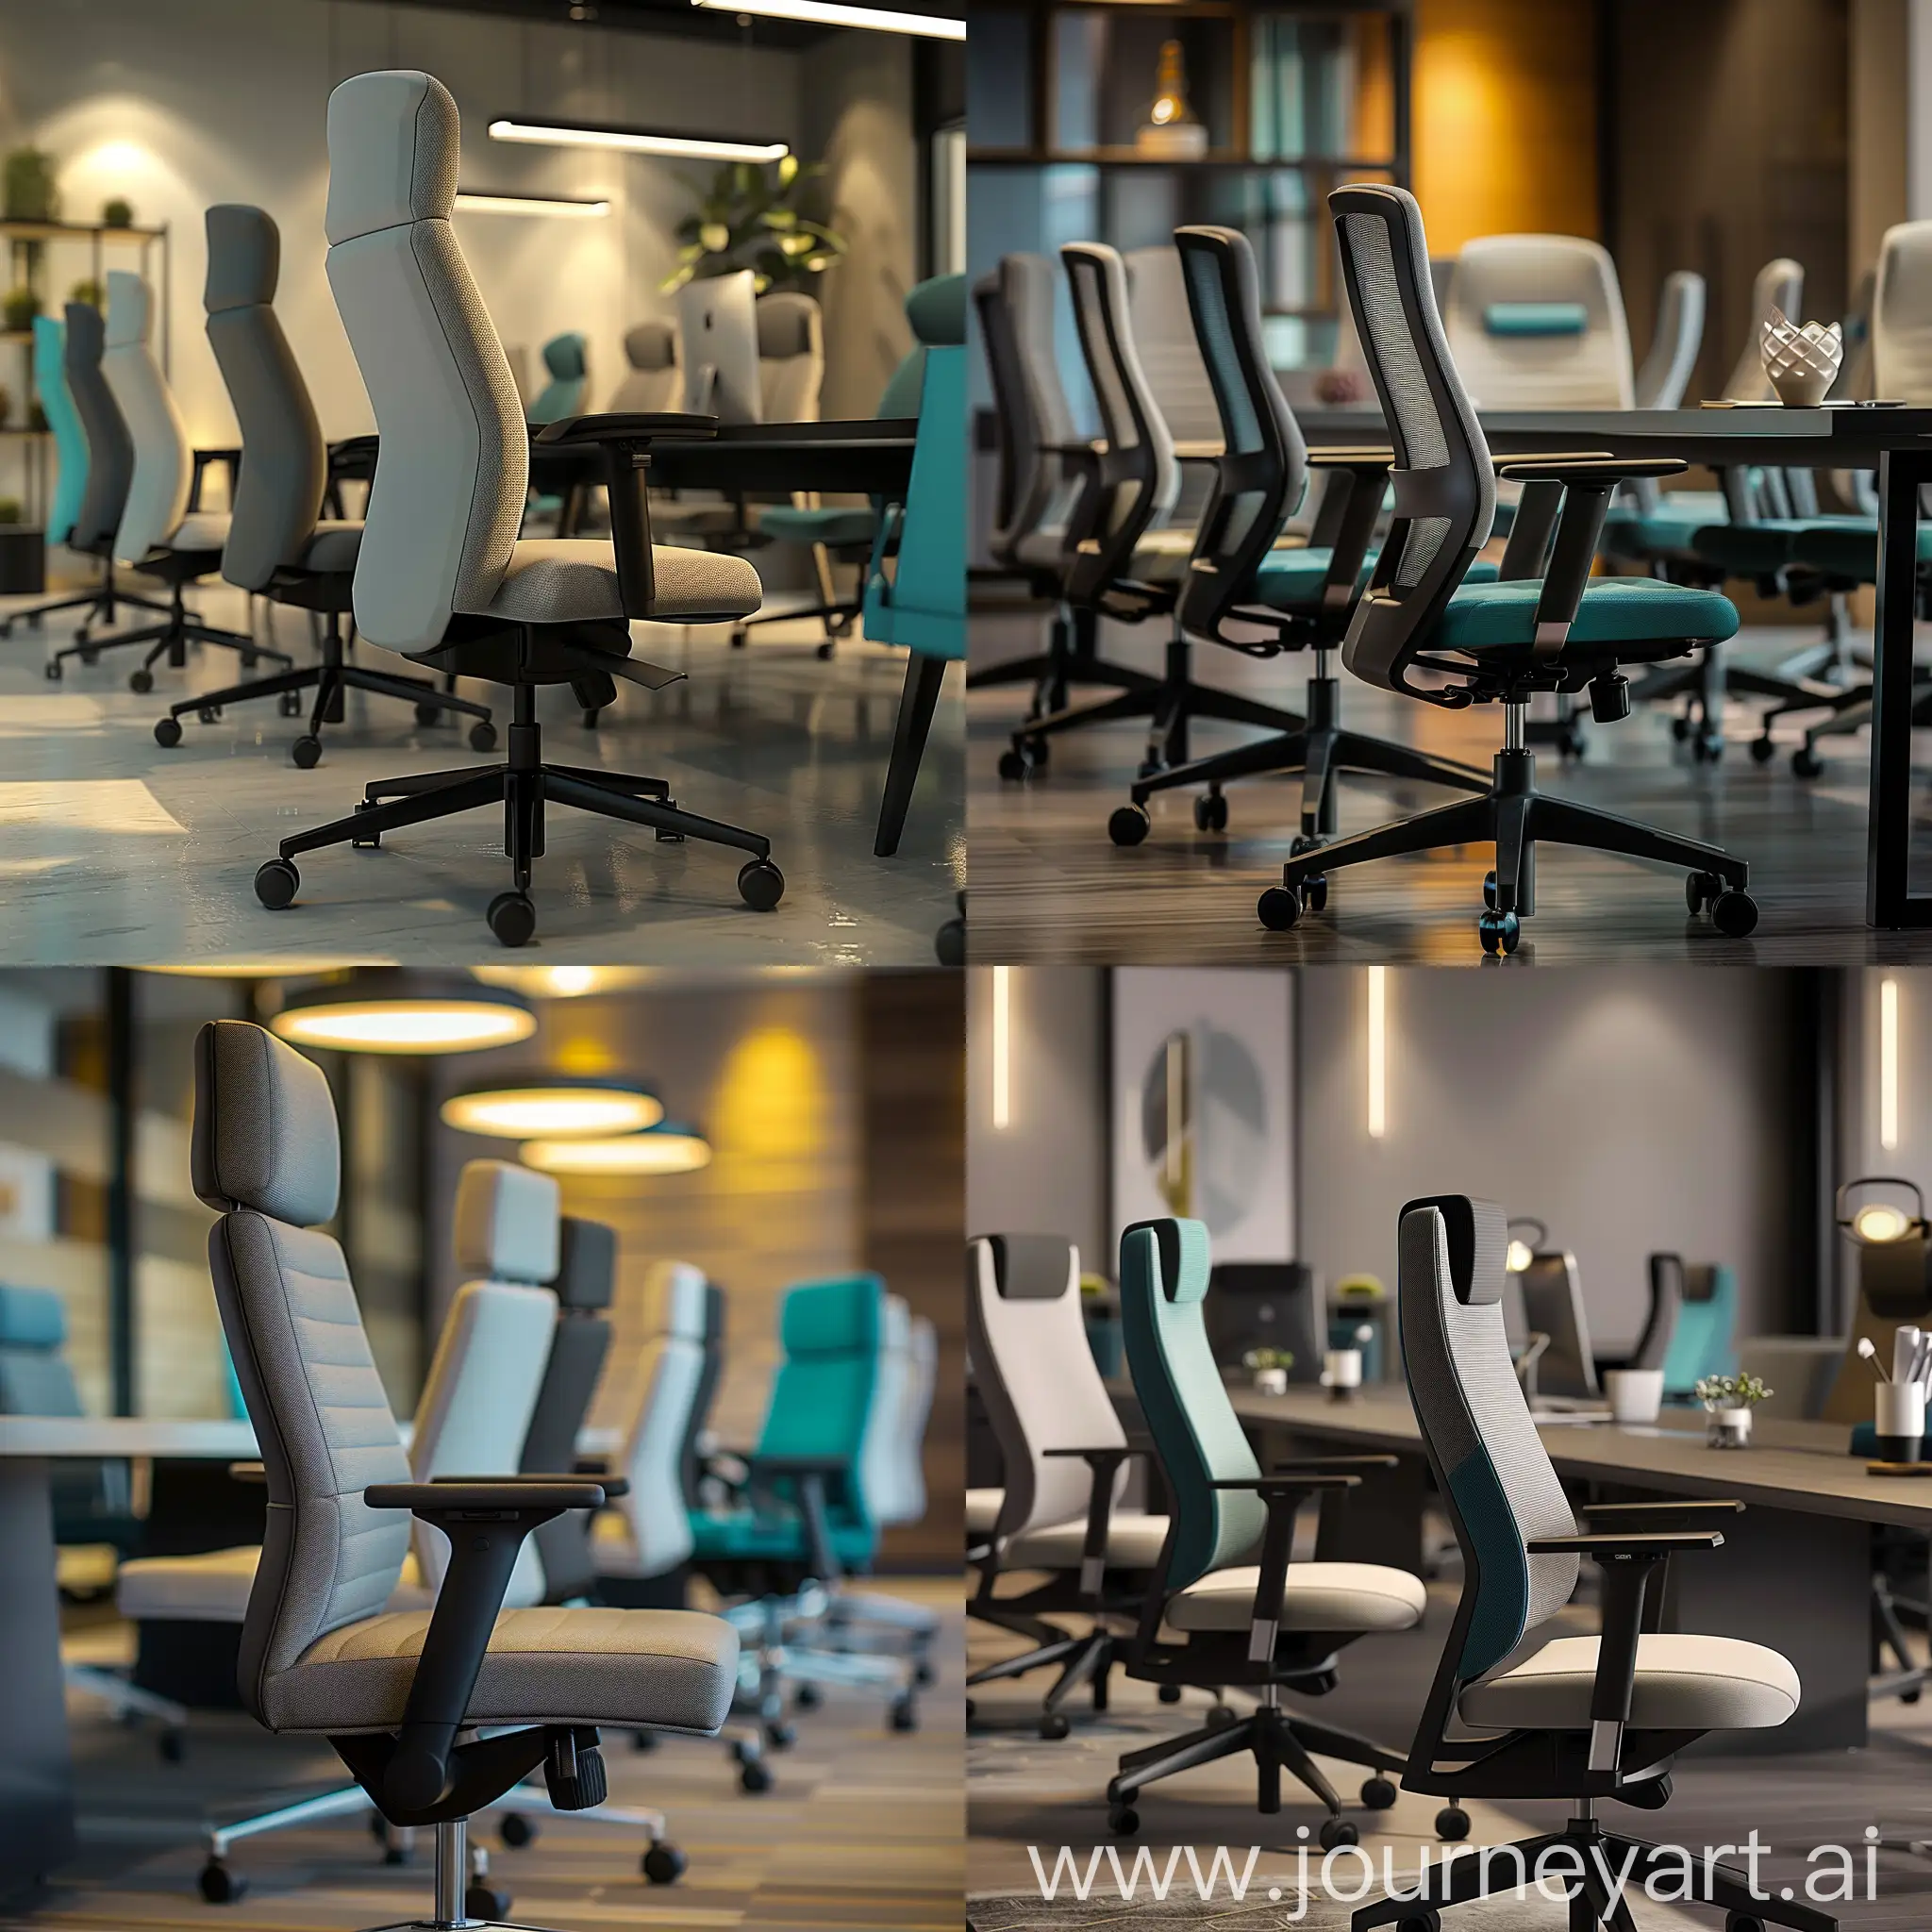 Generate an image of a modern and elegant office, with several ergonomic chairs arranged around a conference table. The chairs should have a contemporary design, with clean lines and high-quality finishes. The main color of the chairs should be a neutral tone, such as gray or black, with accents in a vibrant color, such as blue or green, to add a touch of style. Ensure that the chairs have adjustable backs, padded armrests, and ergonomic seats to promote comfort and good posture. The lighting in the room should be bright but warm, highlighting the details of the chairs and creating a welcoming and professional atmosphere.